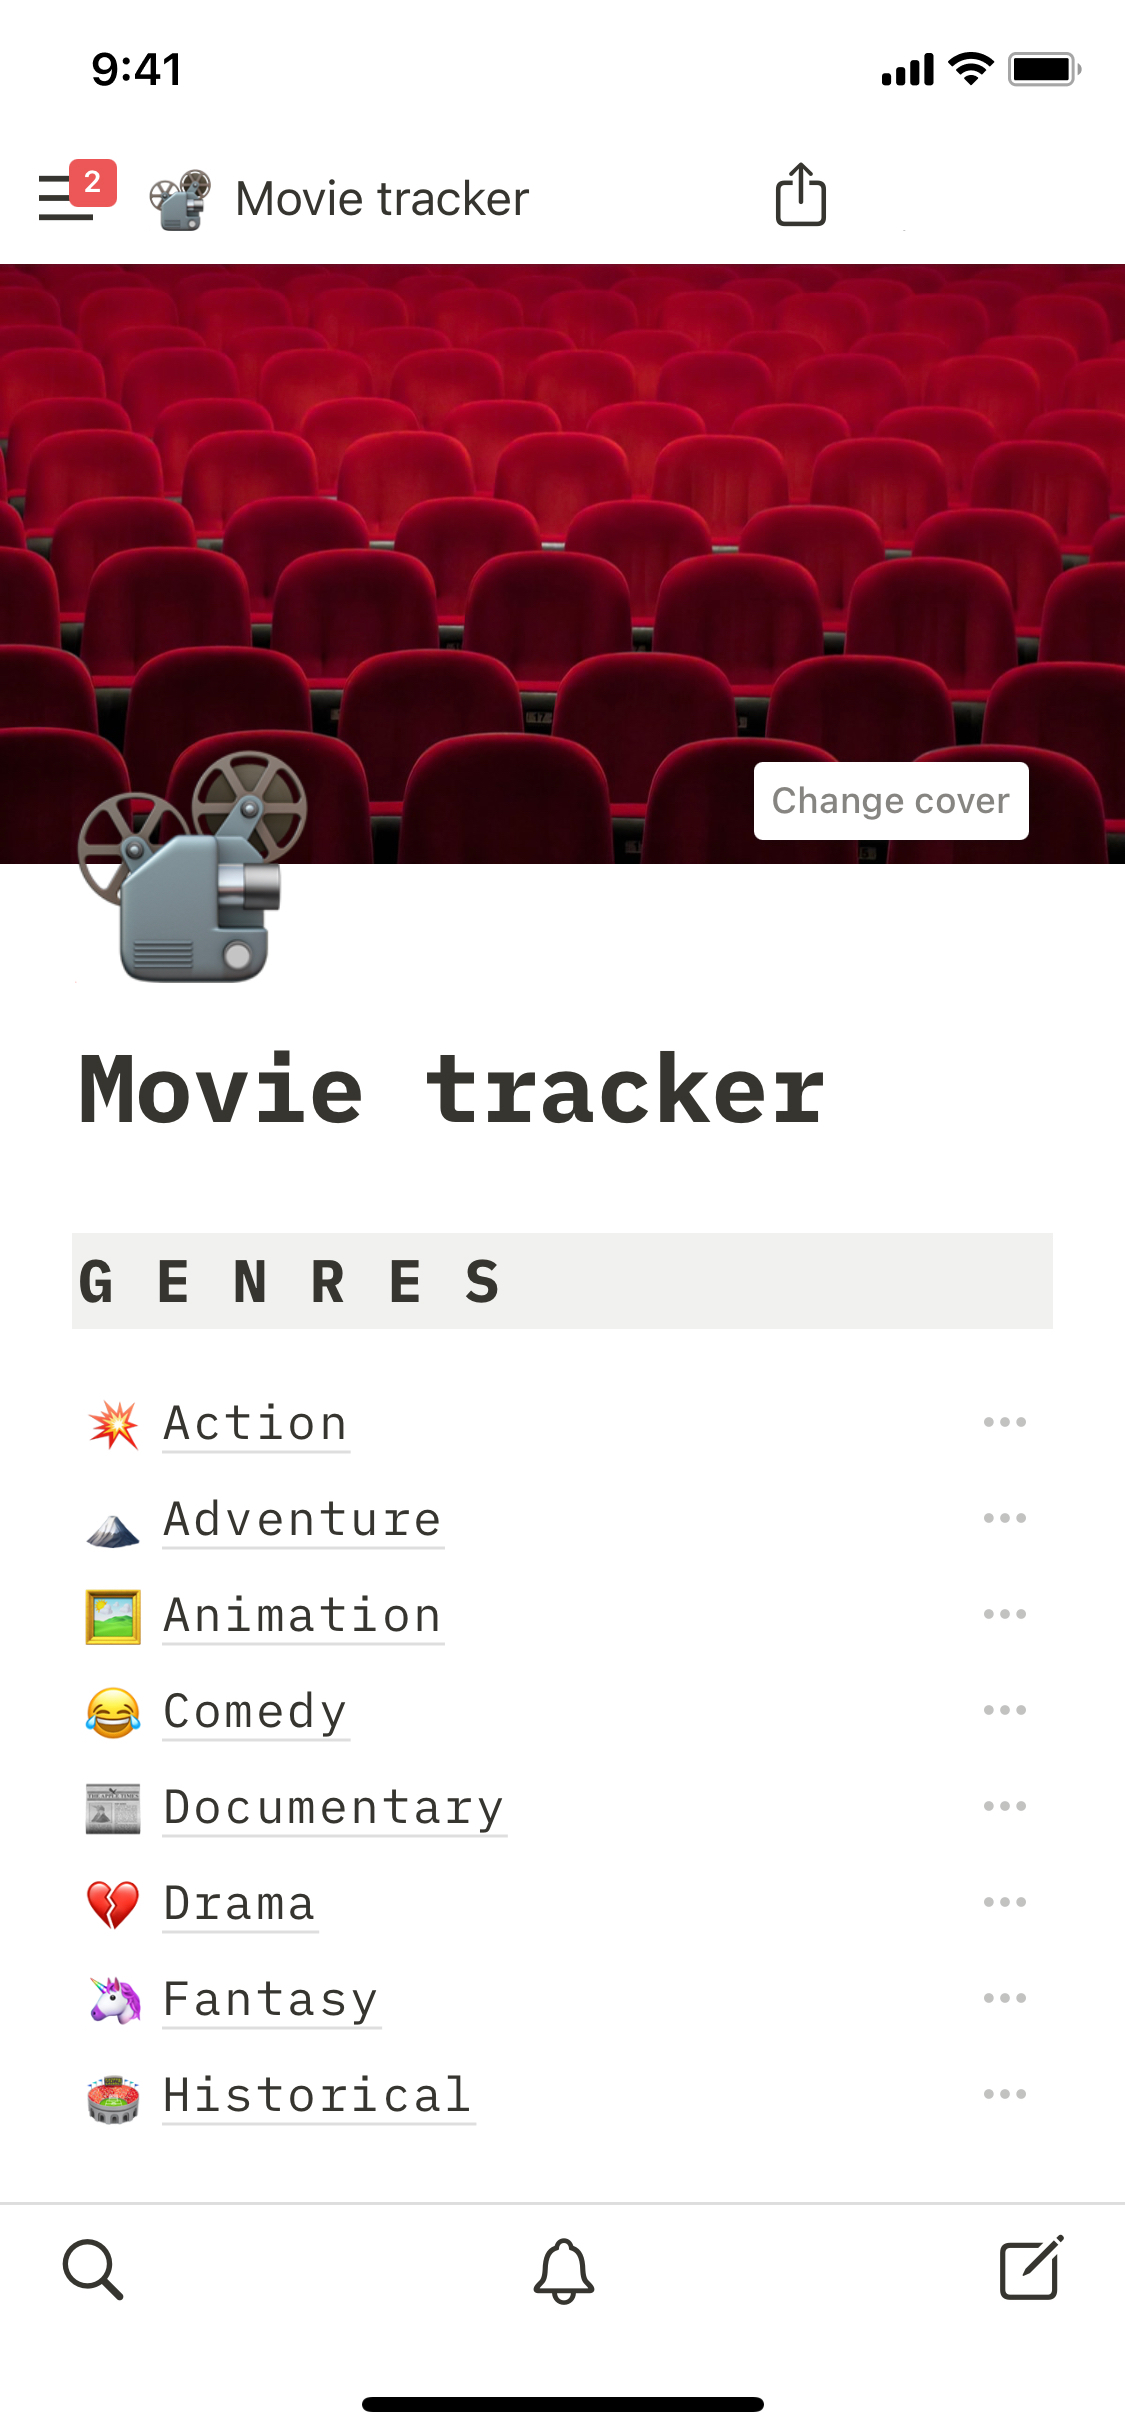 A screenshot of Notion's mobile app